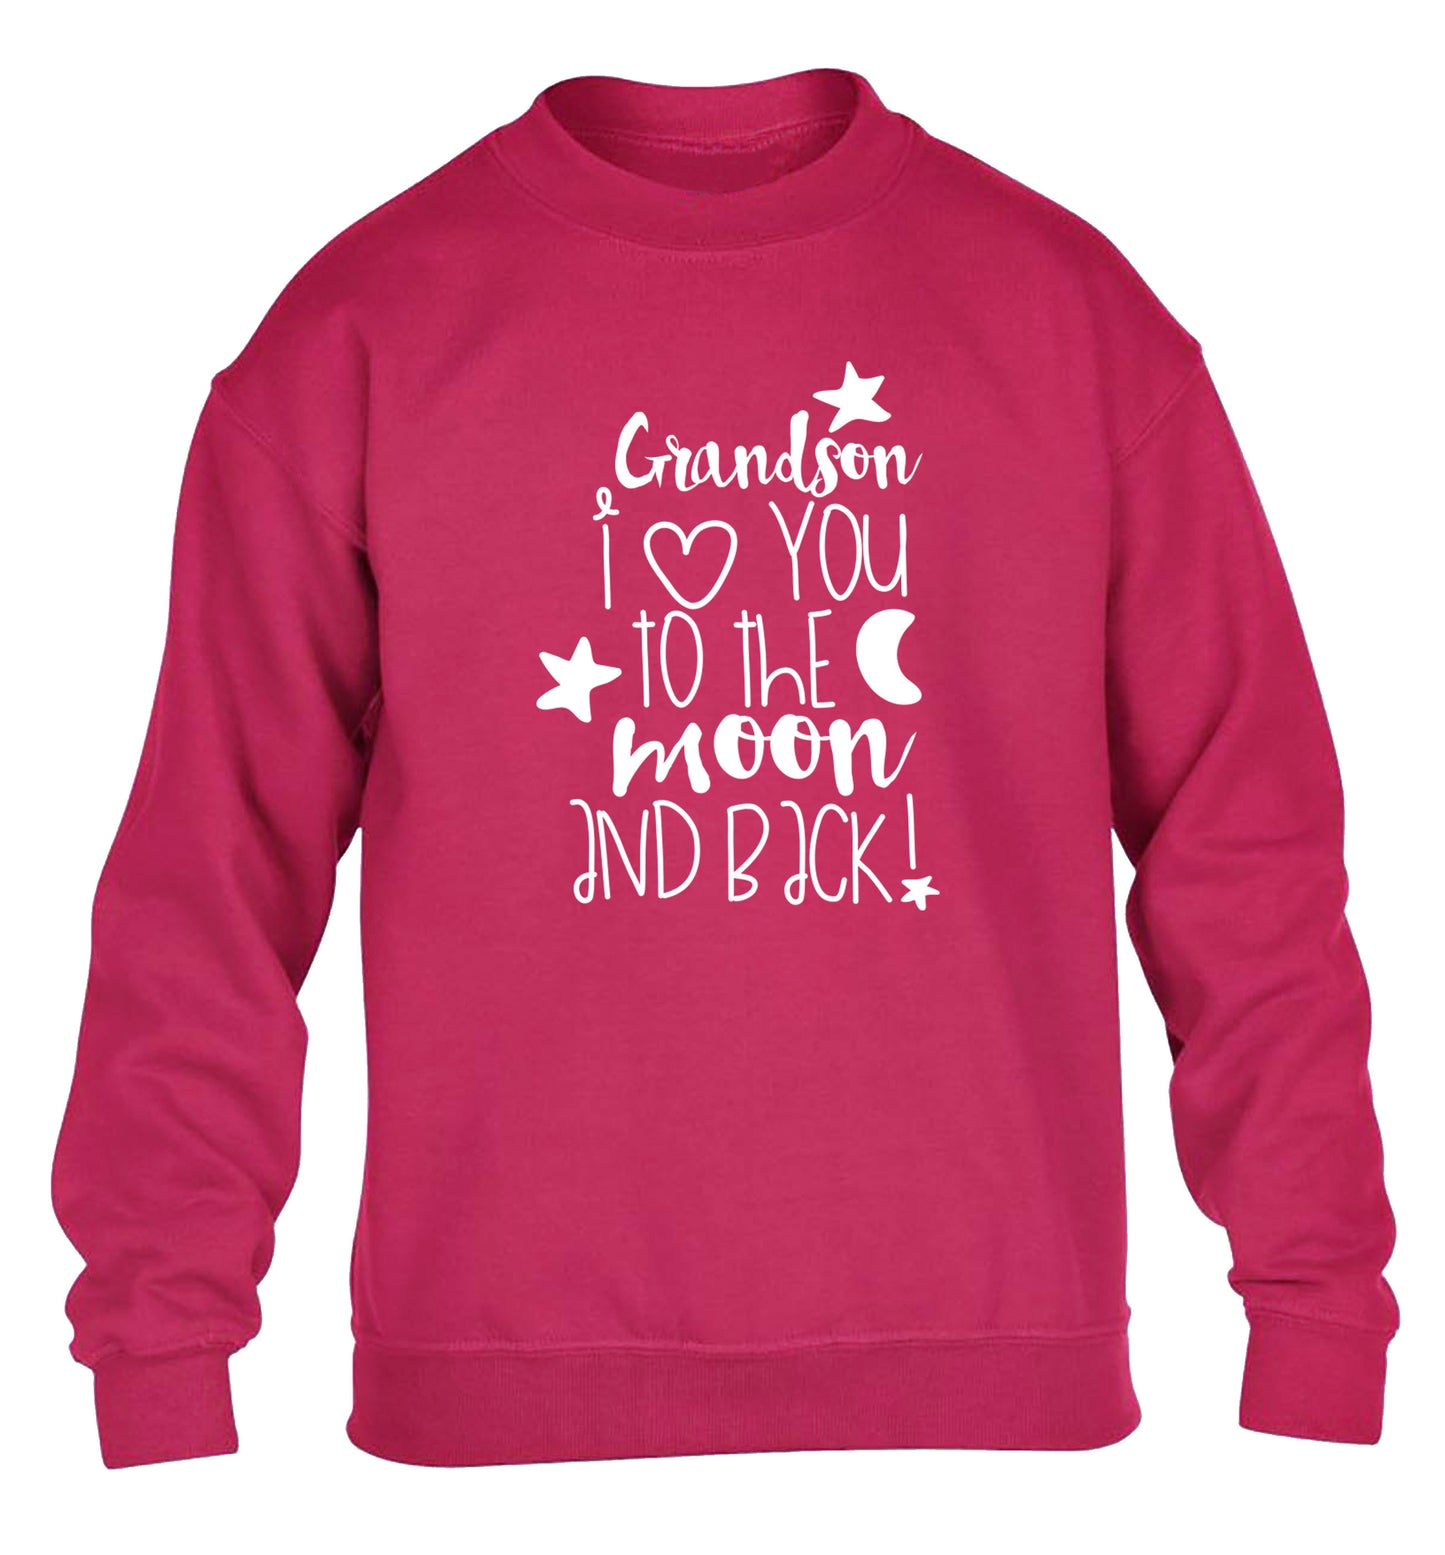 Grandson I love you to the moon and back children's pink  sweater 12-14 Years